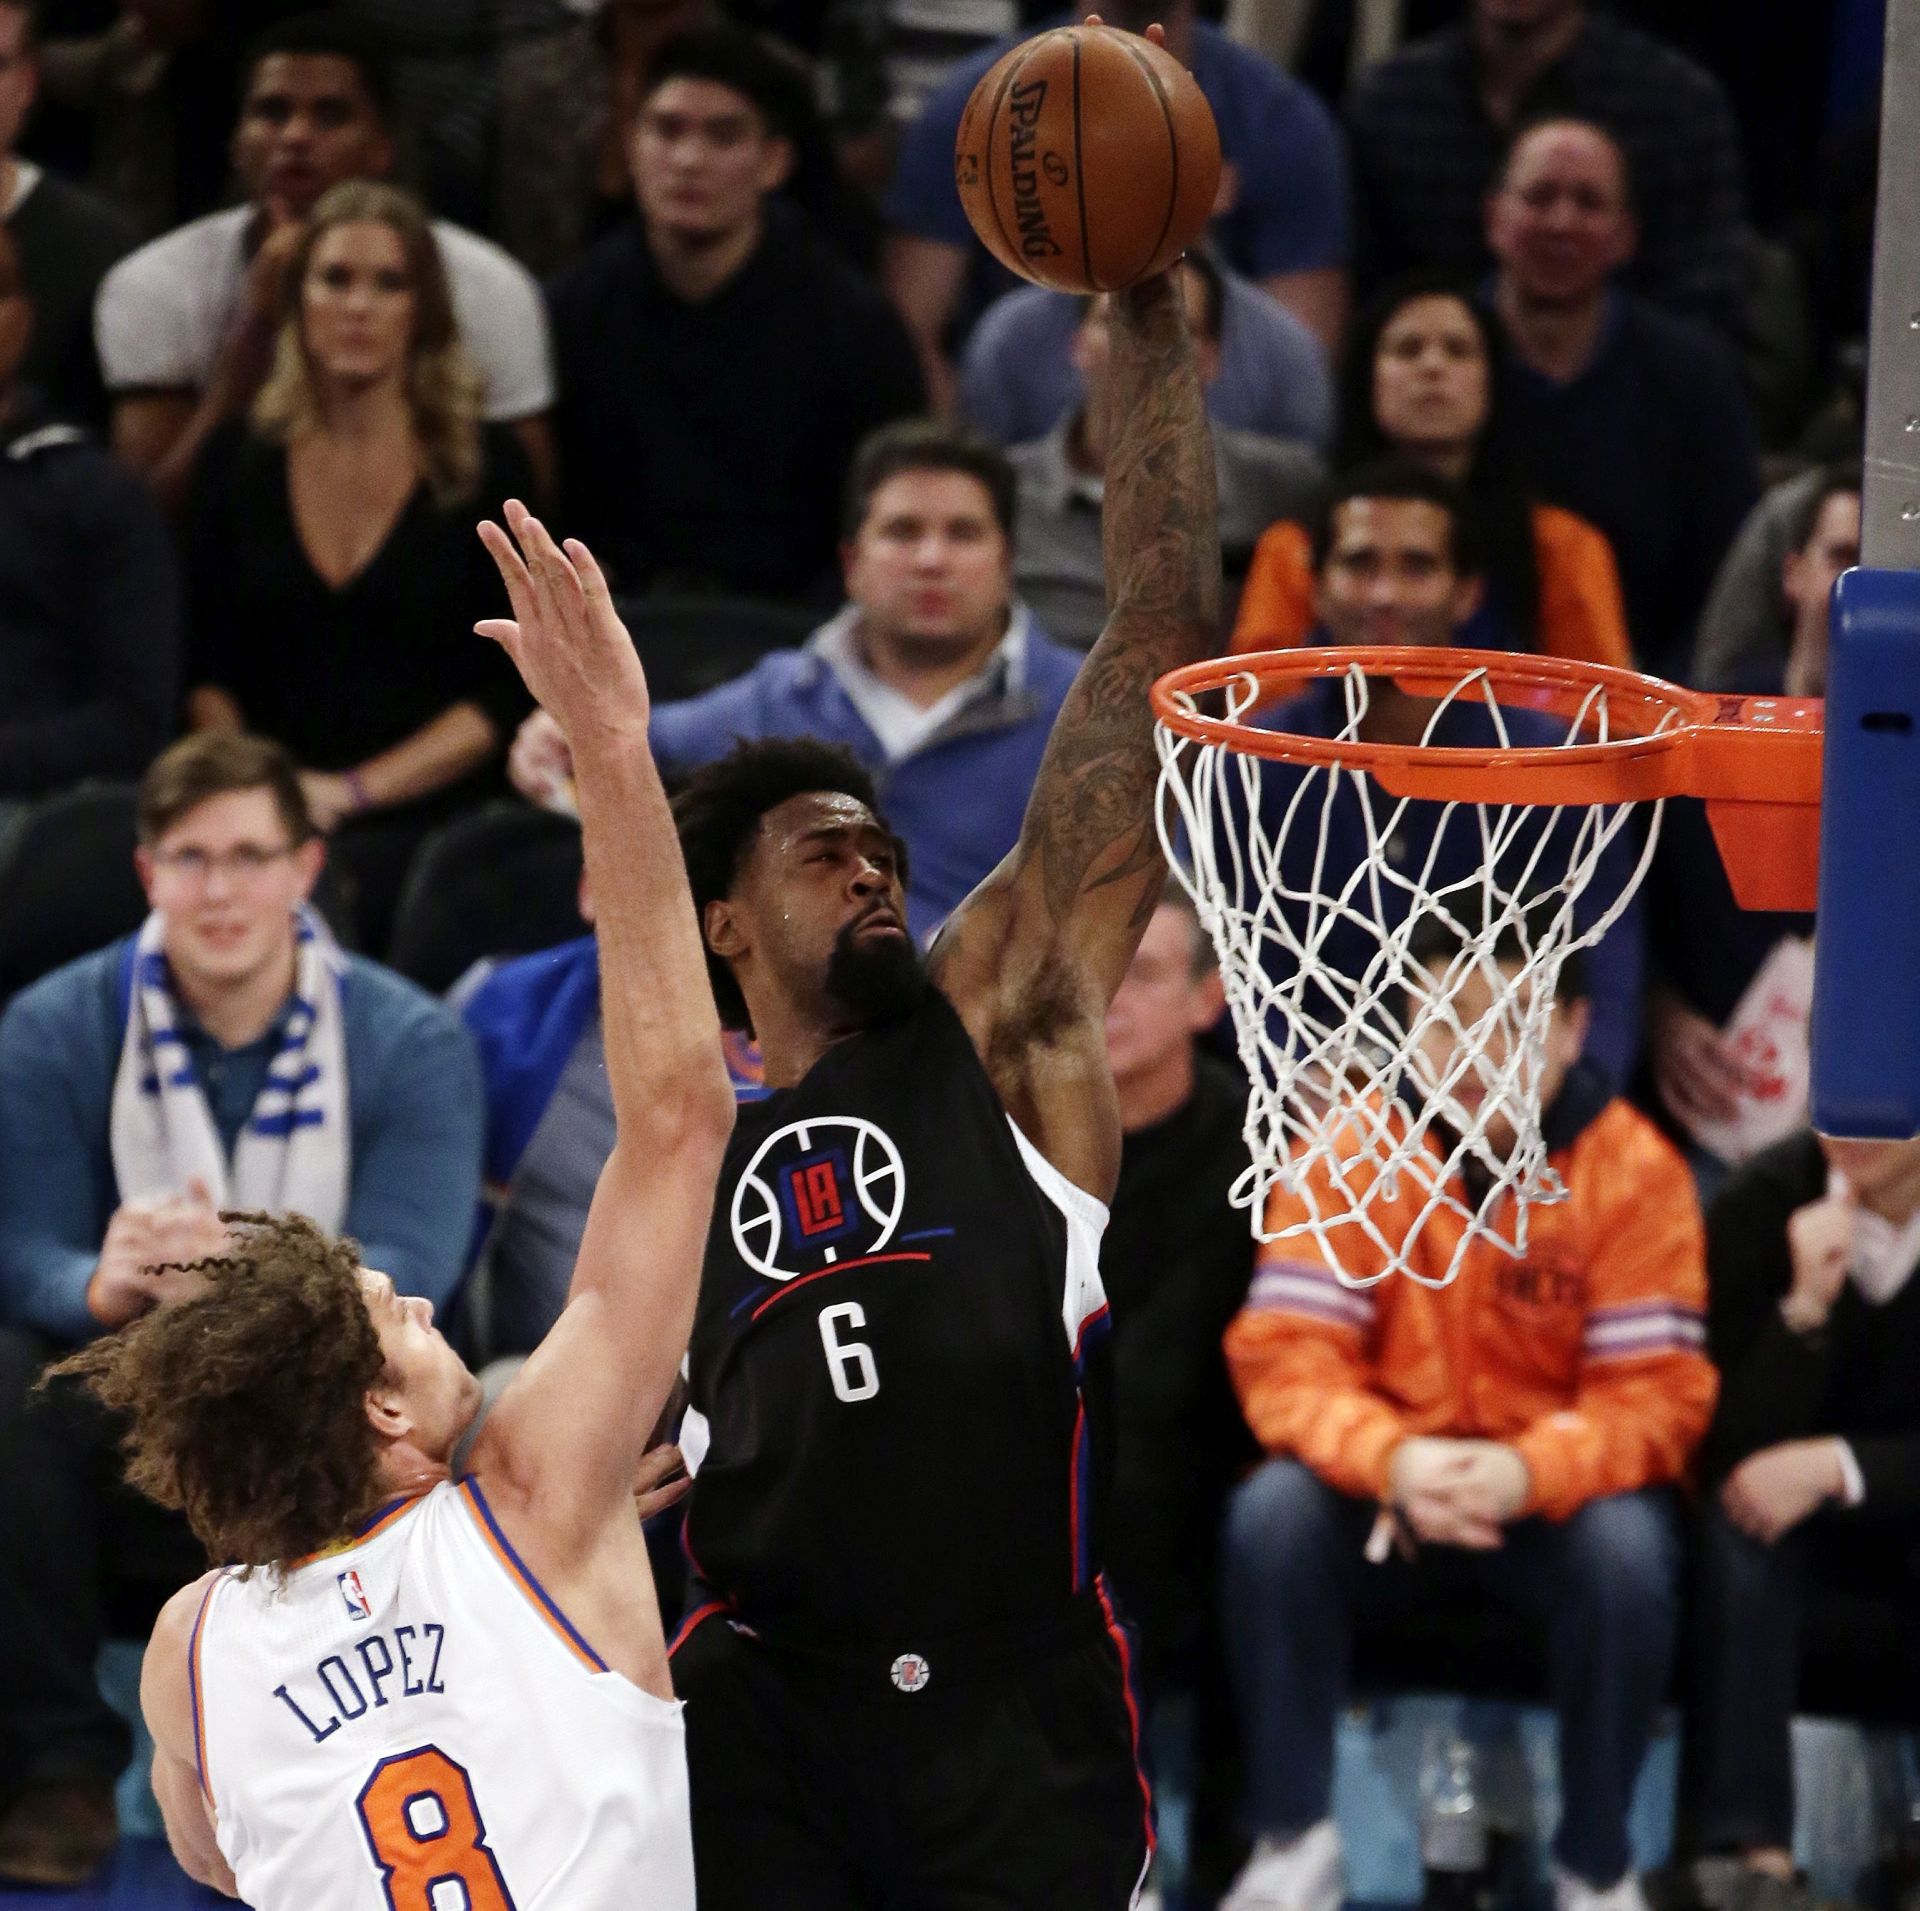 epa05119644 Los Angeles Clippers center DeAndre Jordan (L) looks to dunk the ball past a defending New York Knicks center Robin Lopez in the second half of their NBA game at Madison Square Garden in New York, New York, USA, 22 January 2016.  EPA/JASON SZENES CORBIS OUT